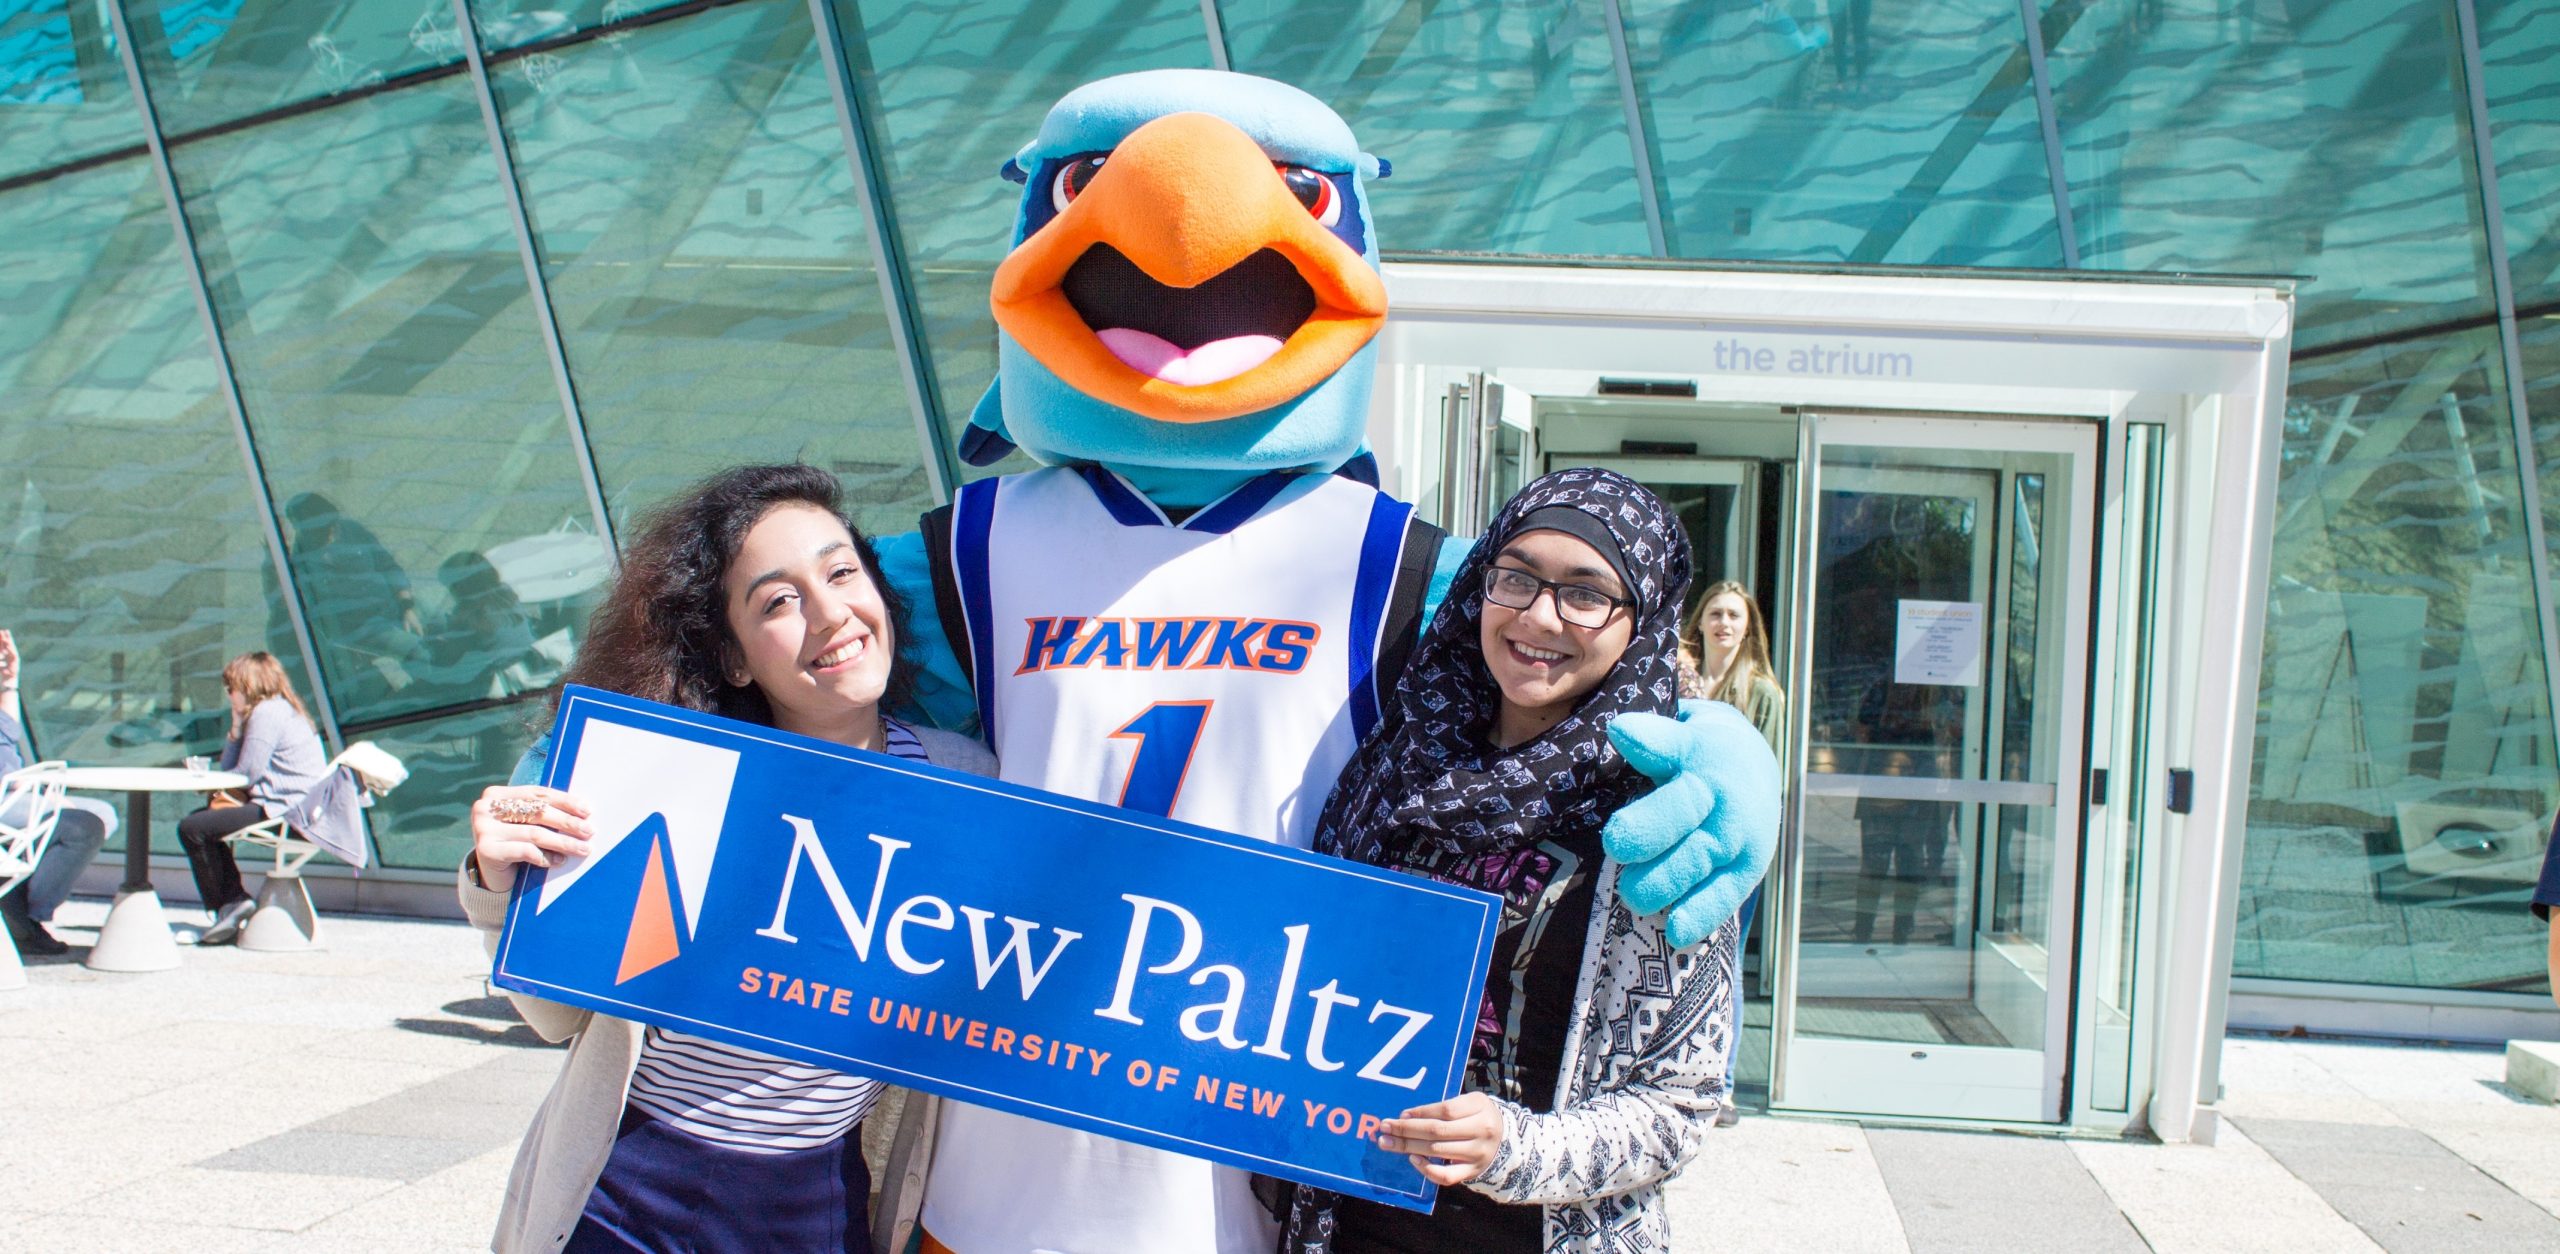 COVID19 Implications Cause SUNY New Paltz Acceptance Rate to Increase